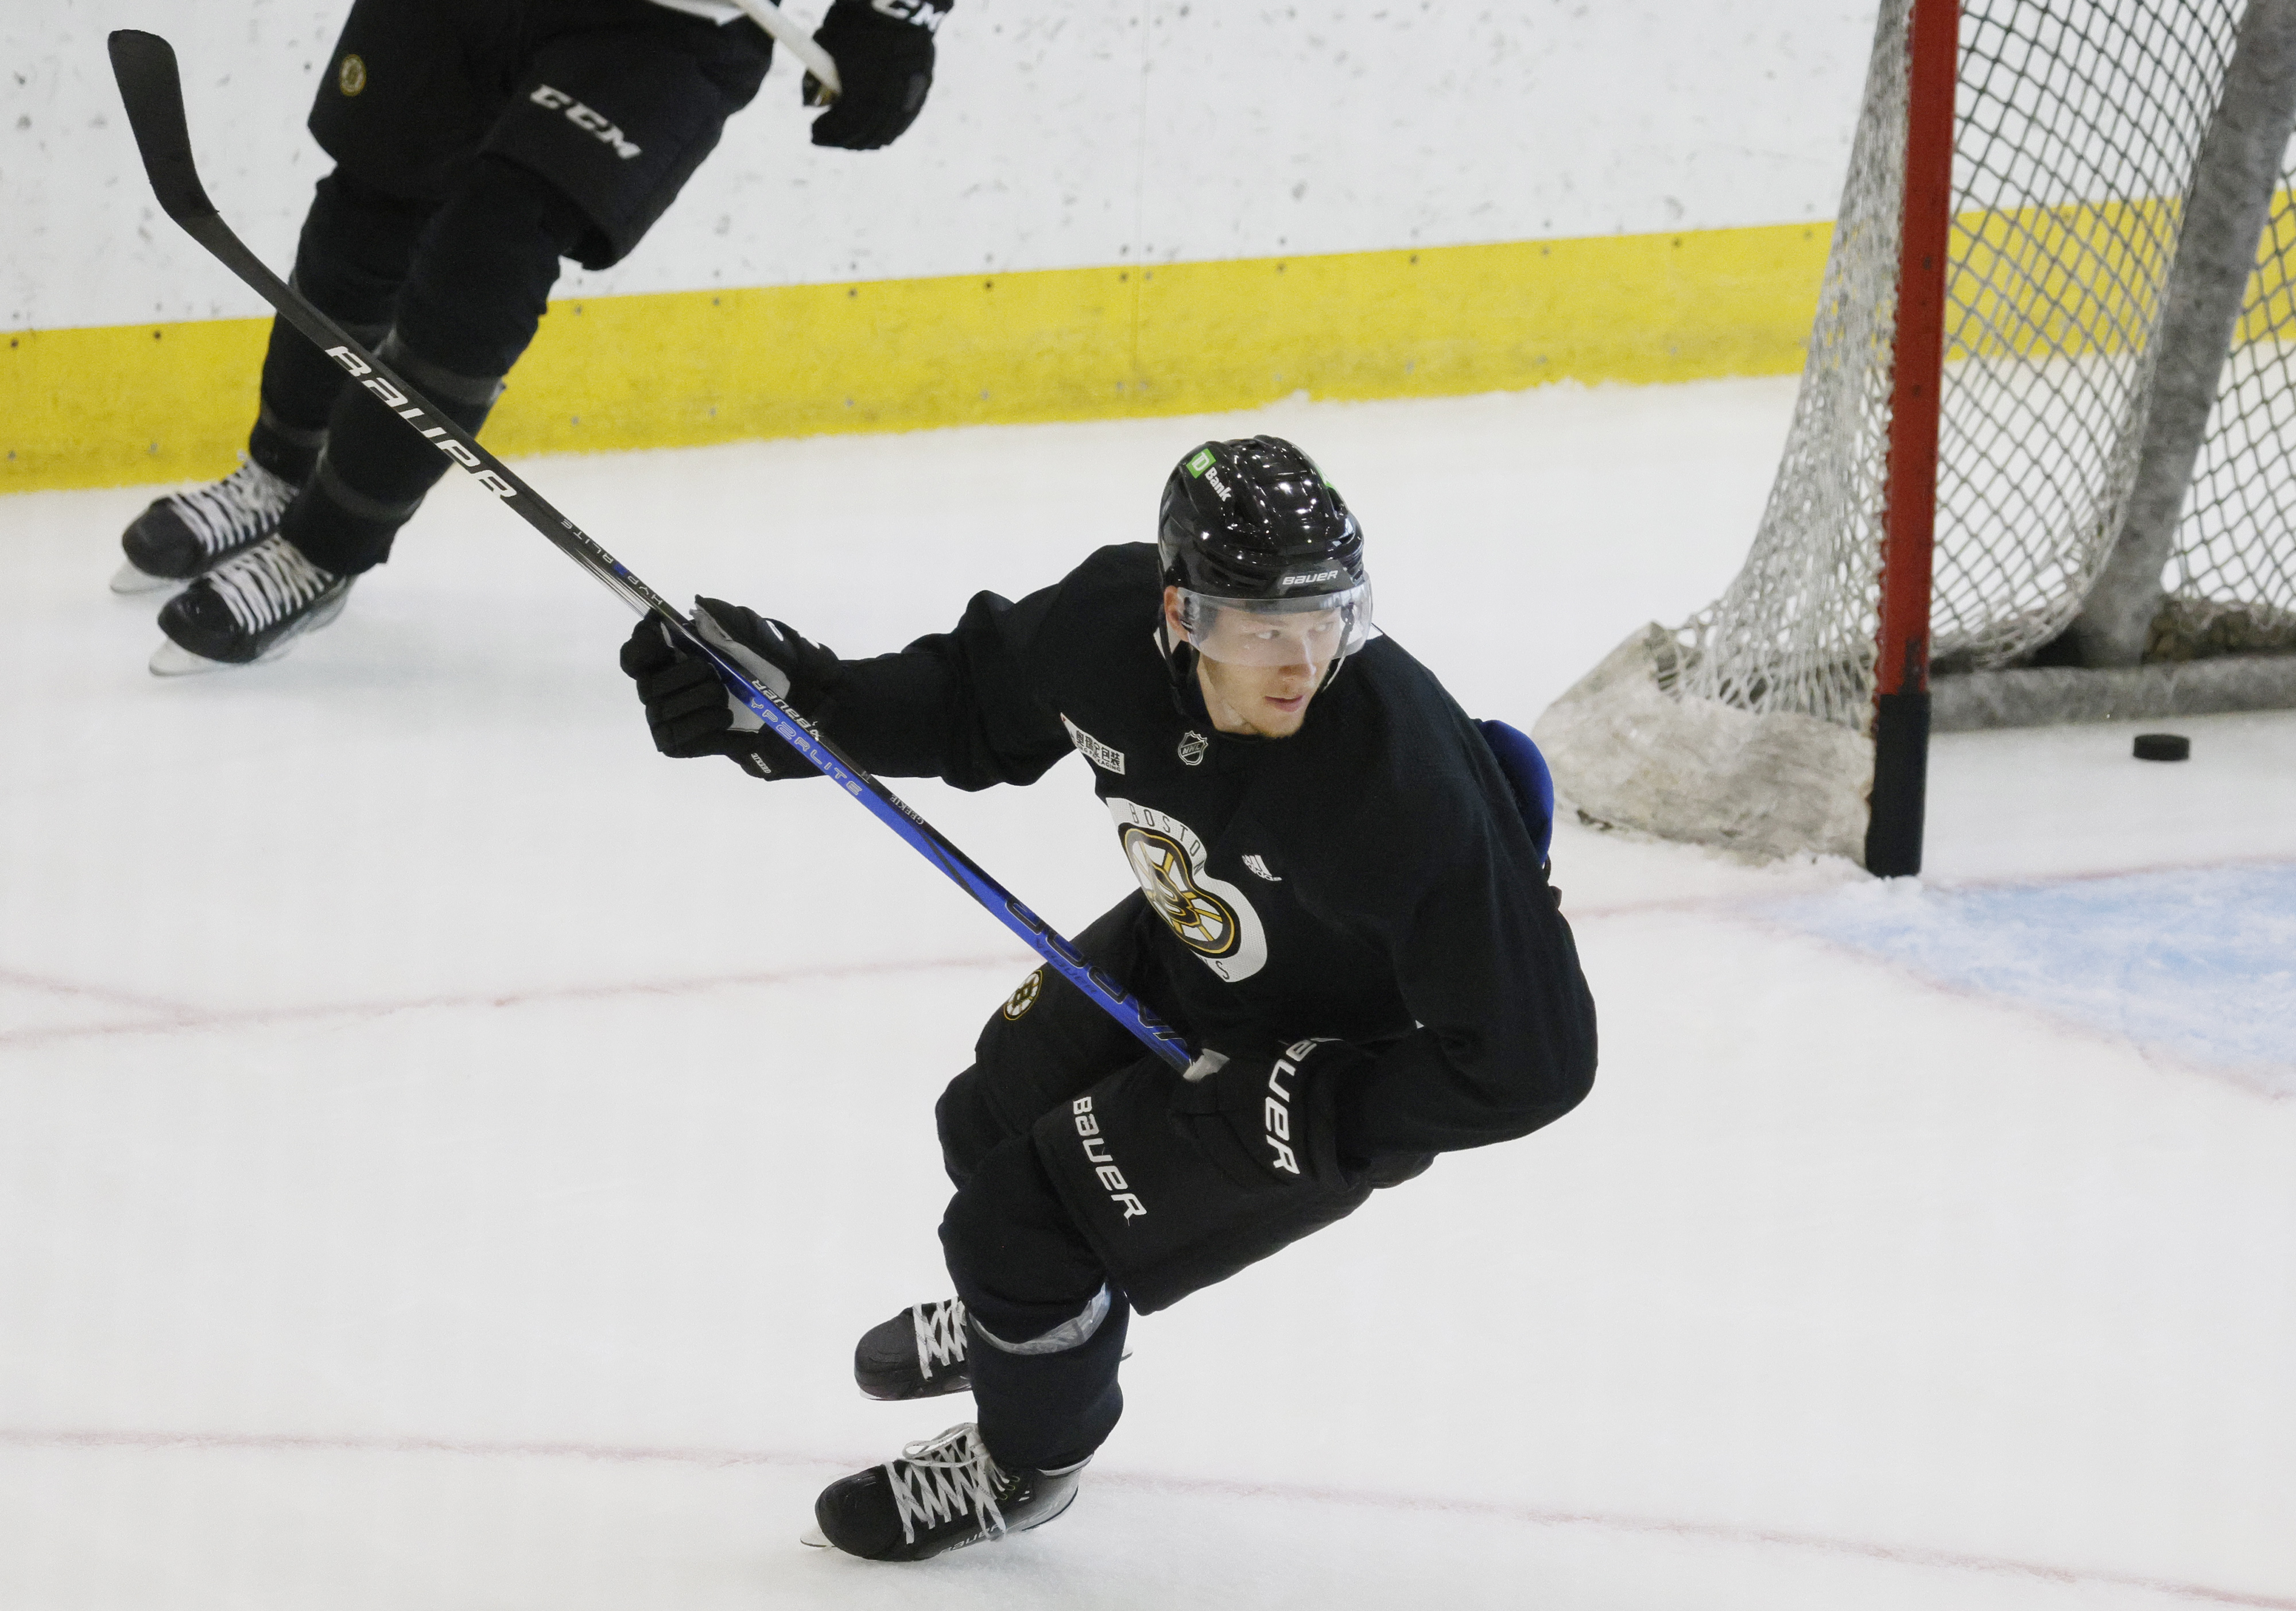 Catching up with Morgan Geekie, who is excited for his first Bruins training camp